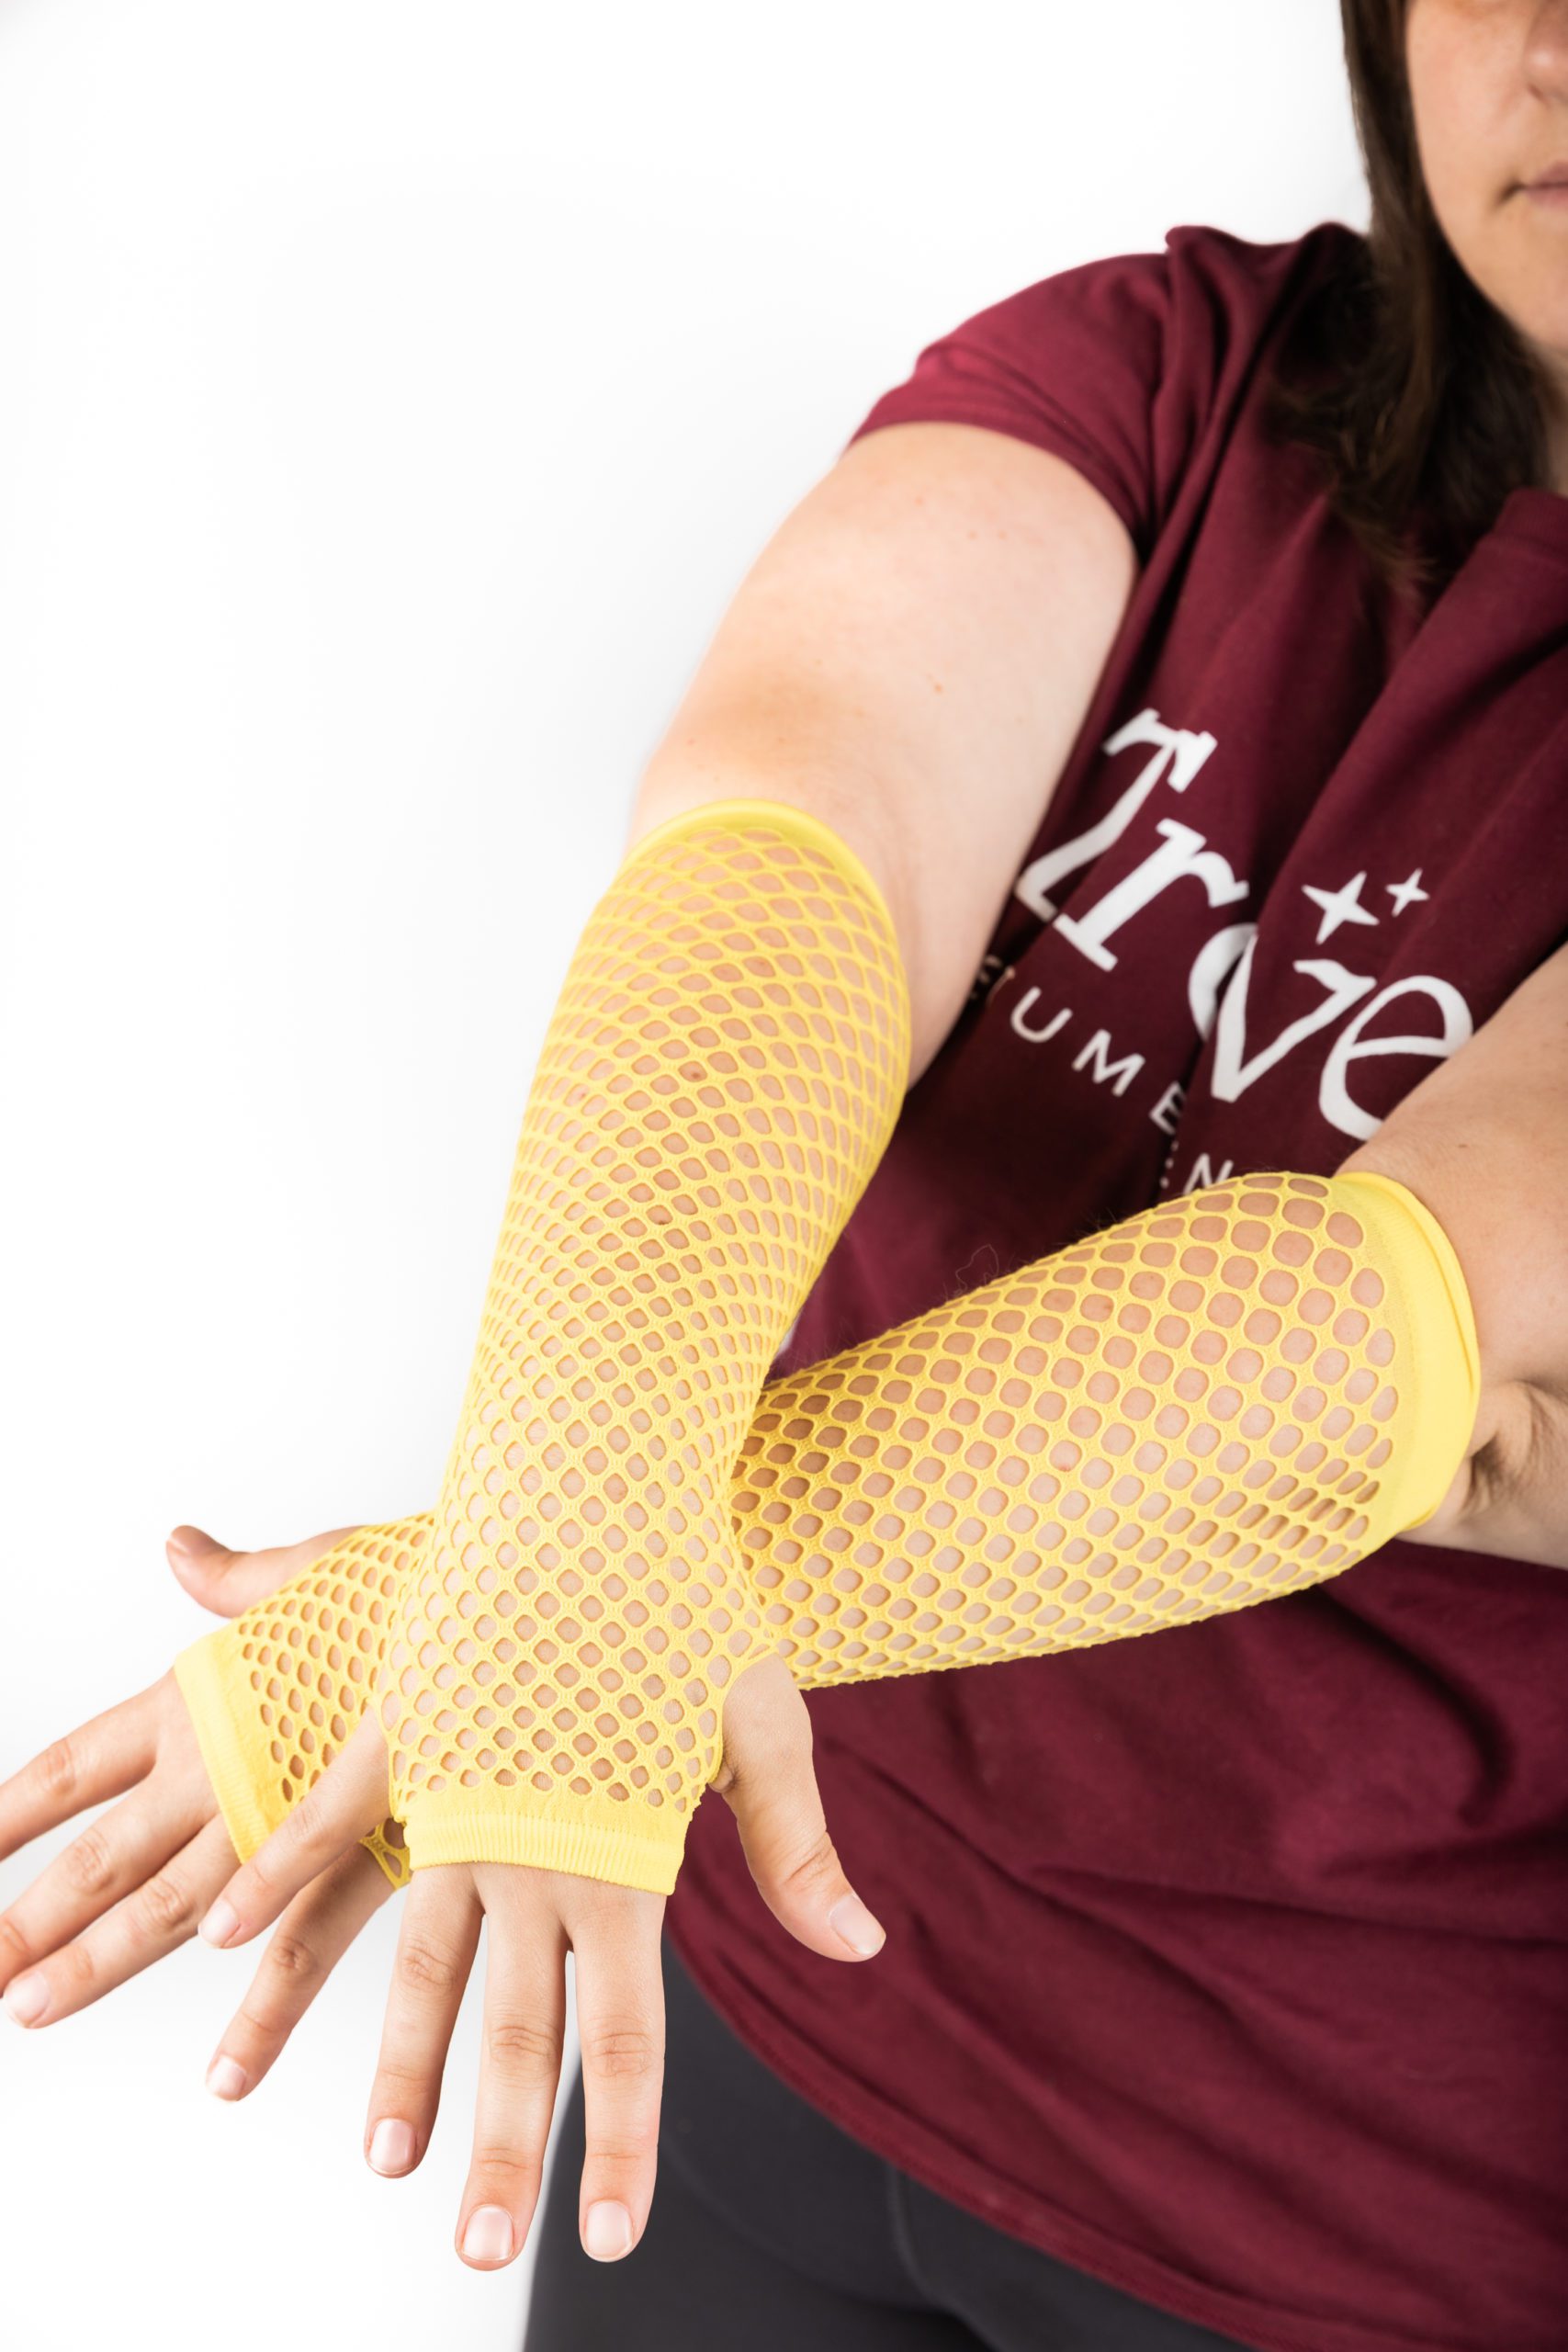 Fabric fish net gloves – many colors and lengths! – see photos for all options